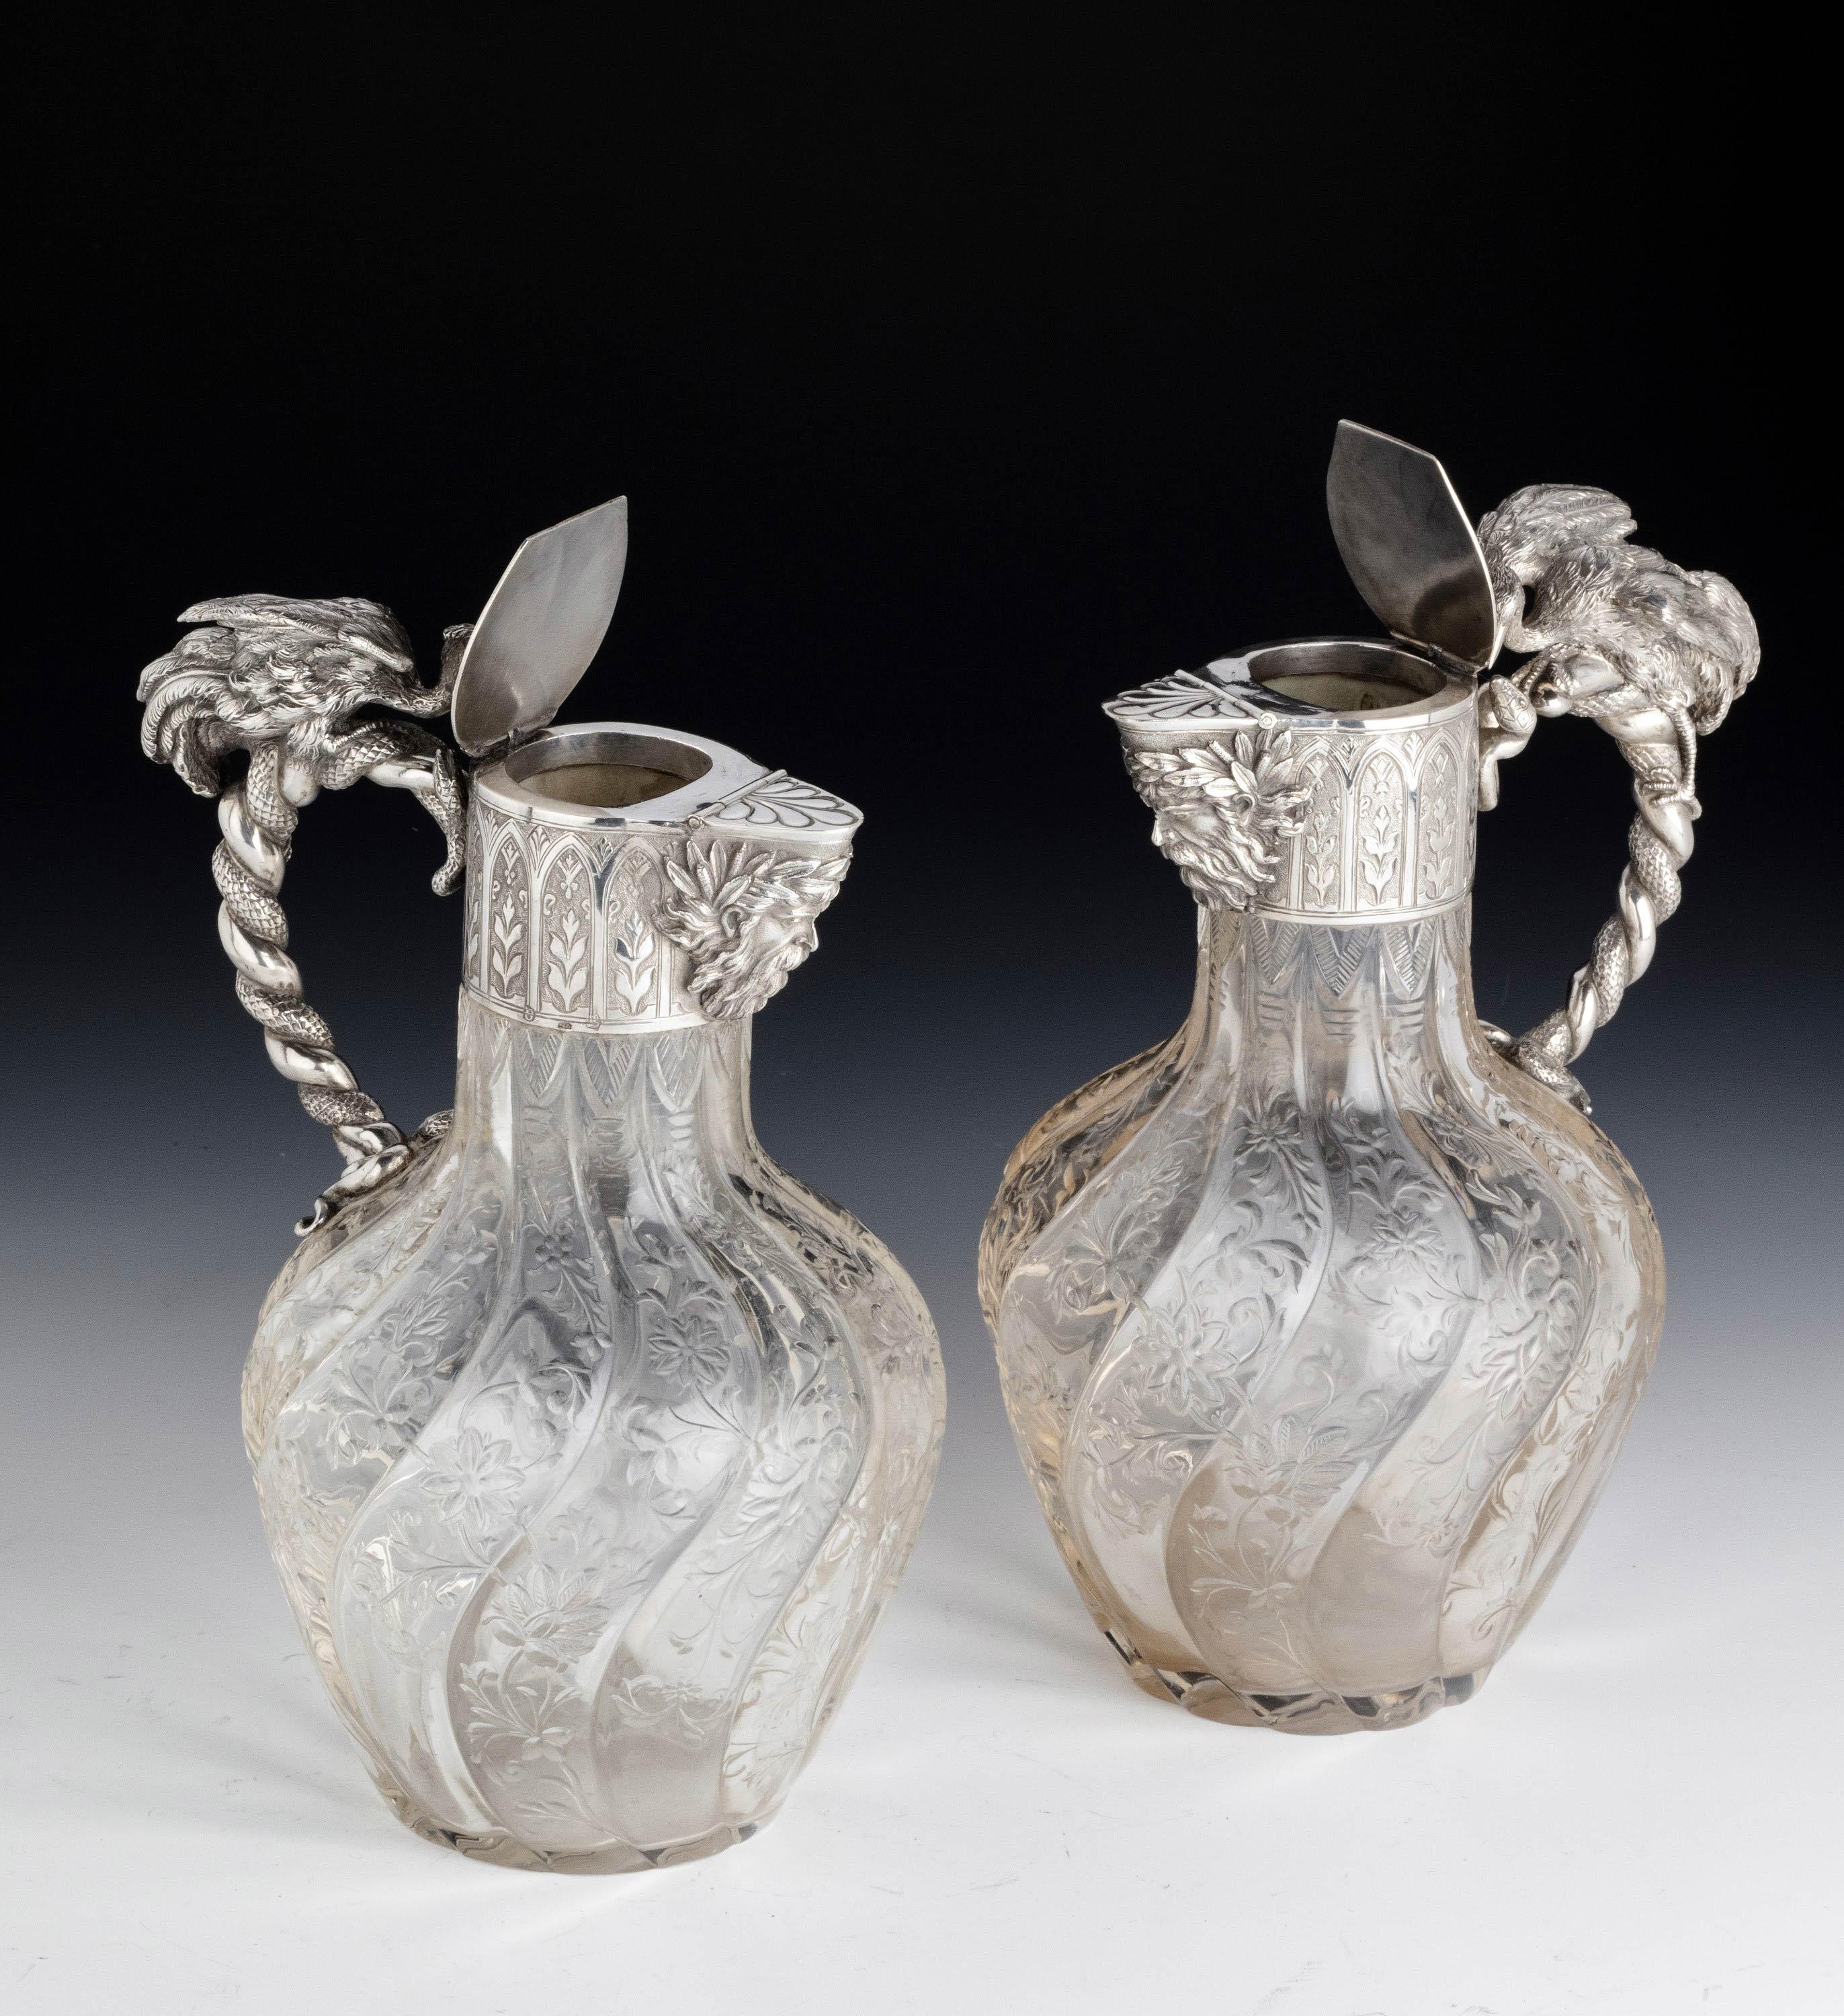 A quite exceptional pair of French silver claret jugs. The top of the handles beautifully cast and chiselled with cranes. The hinge lifting lid over a Bacchus head. The writhen bodies with inactual rock crystal design carving. In exceptional